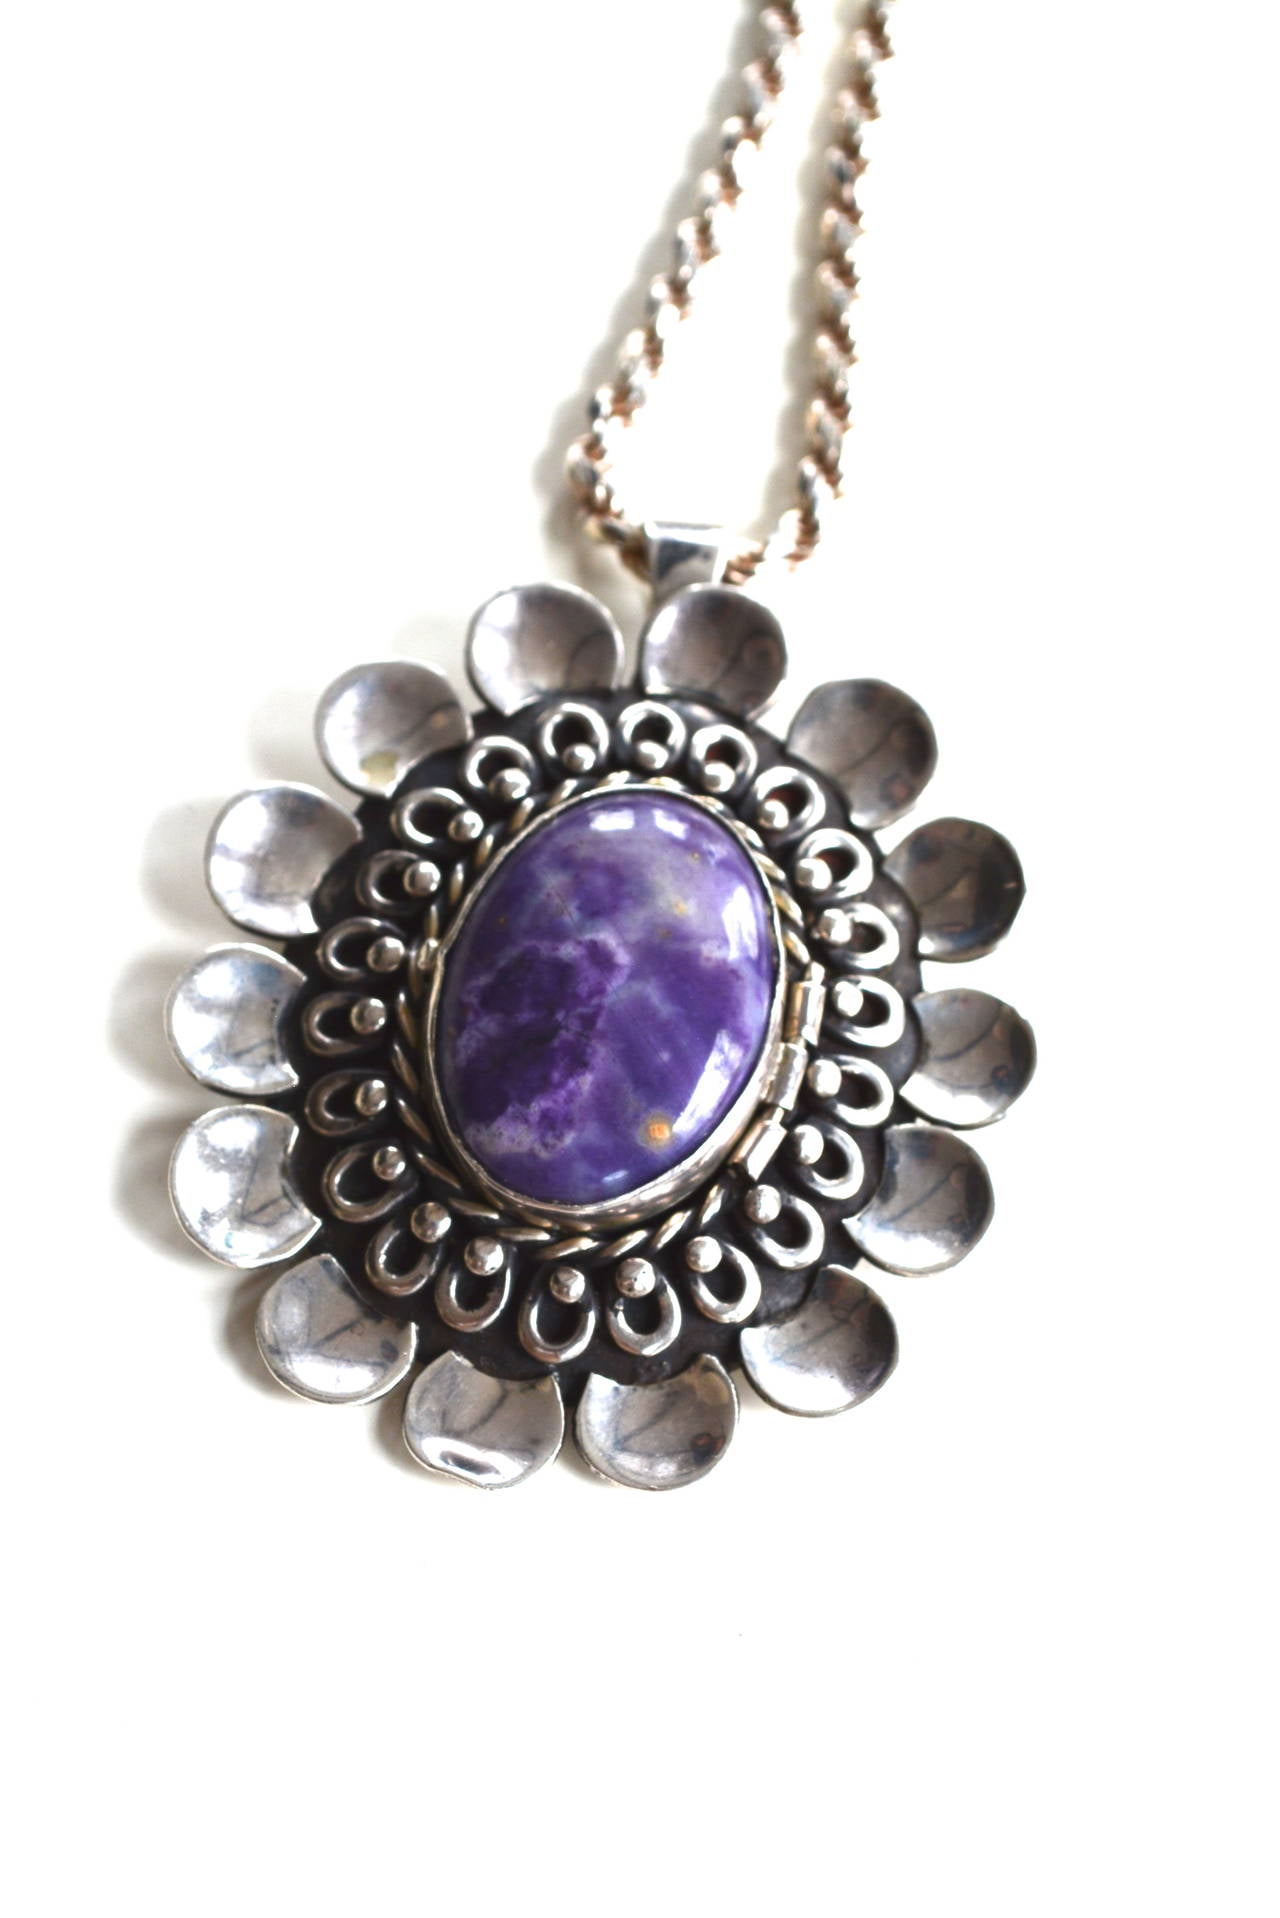 Large stylized purple agate sterling pendant by Los Ballesteros. Signed on the back Talleres de Los Ballesteros. Taxco. Sterling. 925. Hecho en Mexico. It has the B and eagle mark 47 which dates from the 1950s-1979/80. 
The iconic Los Ballesteros